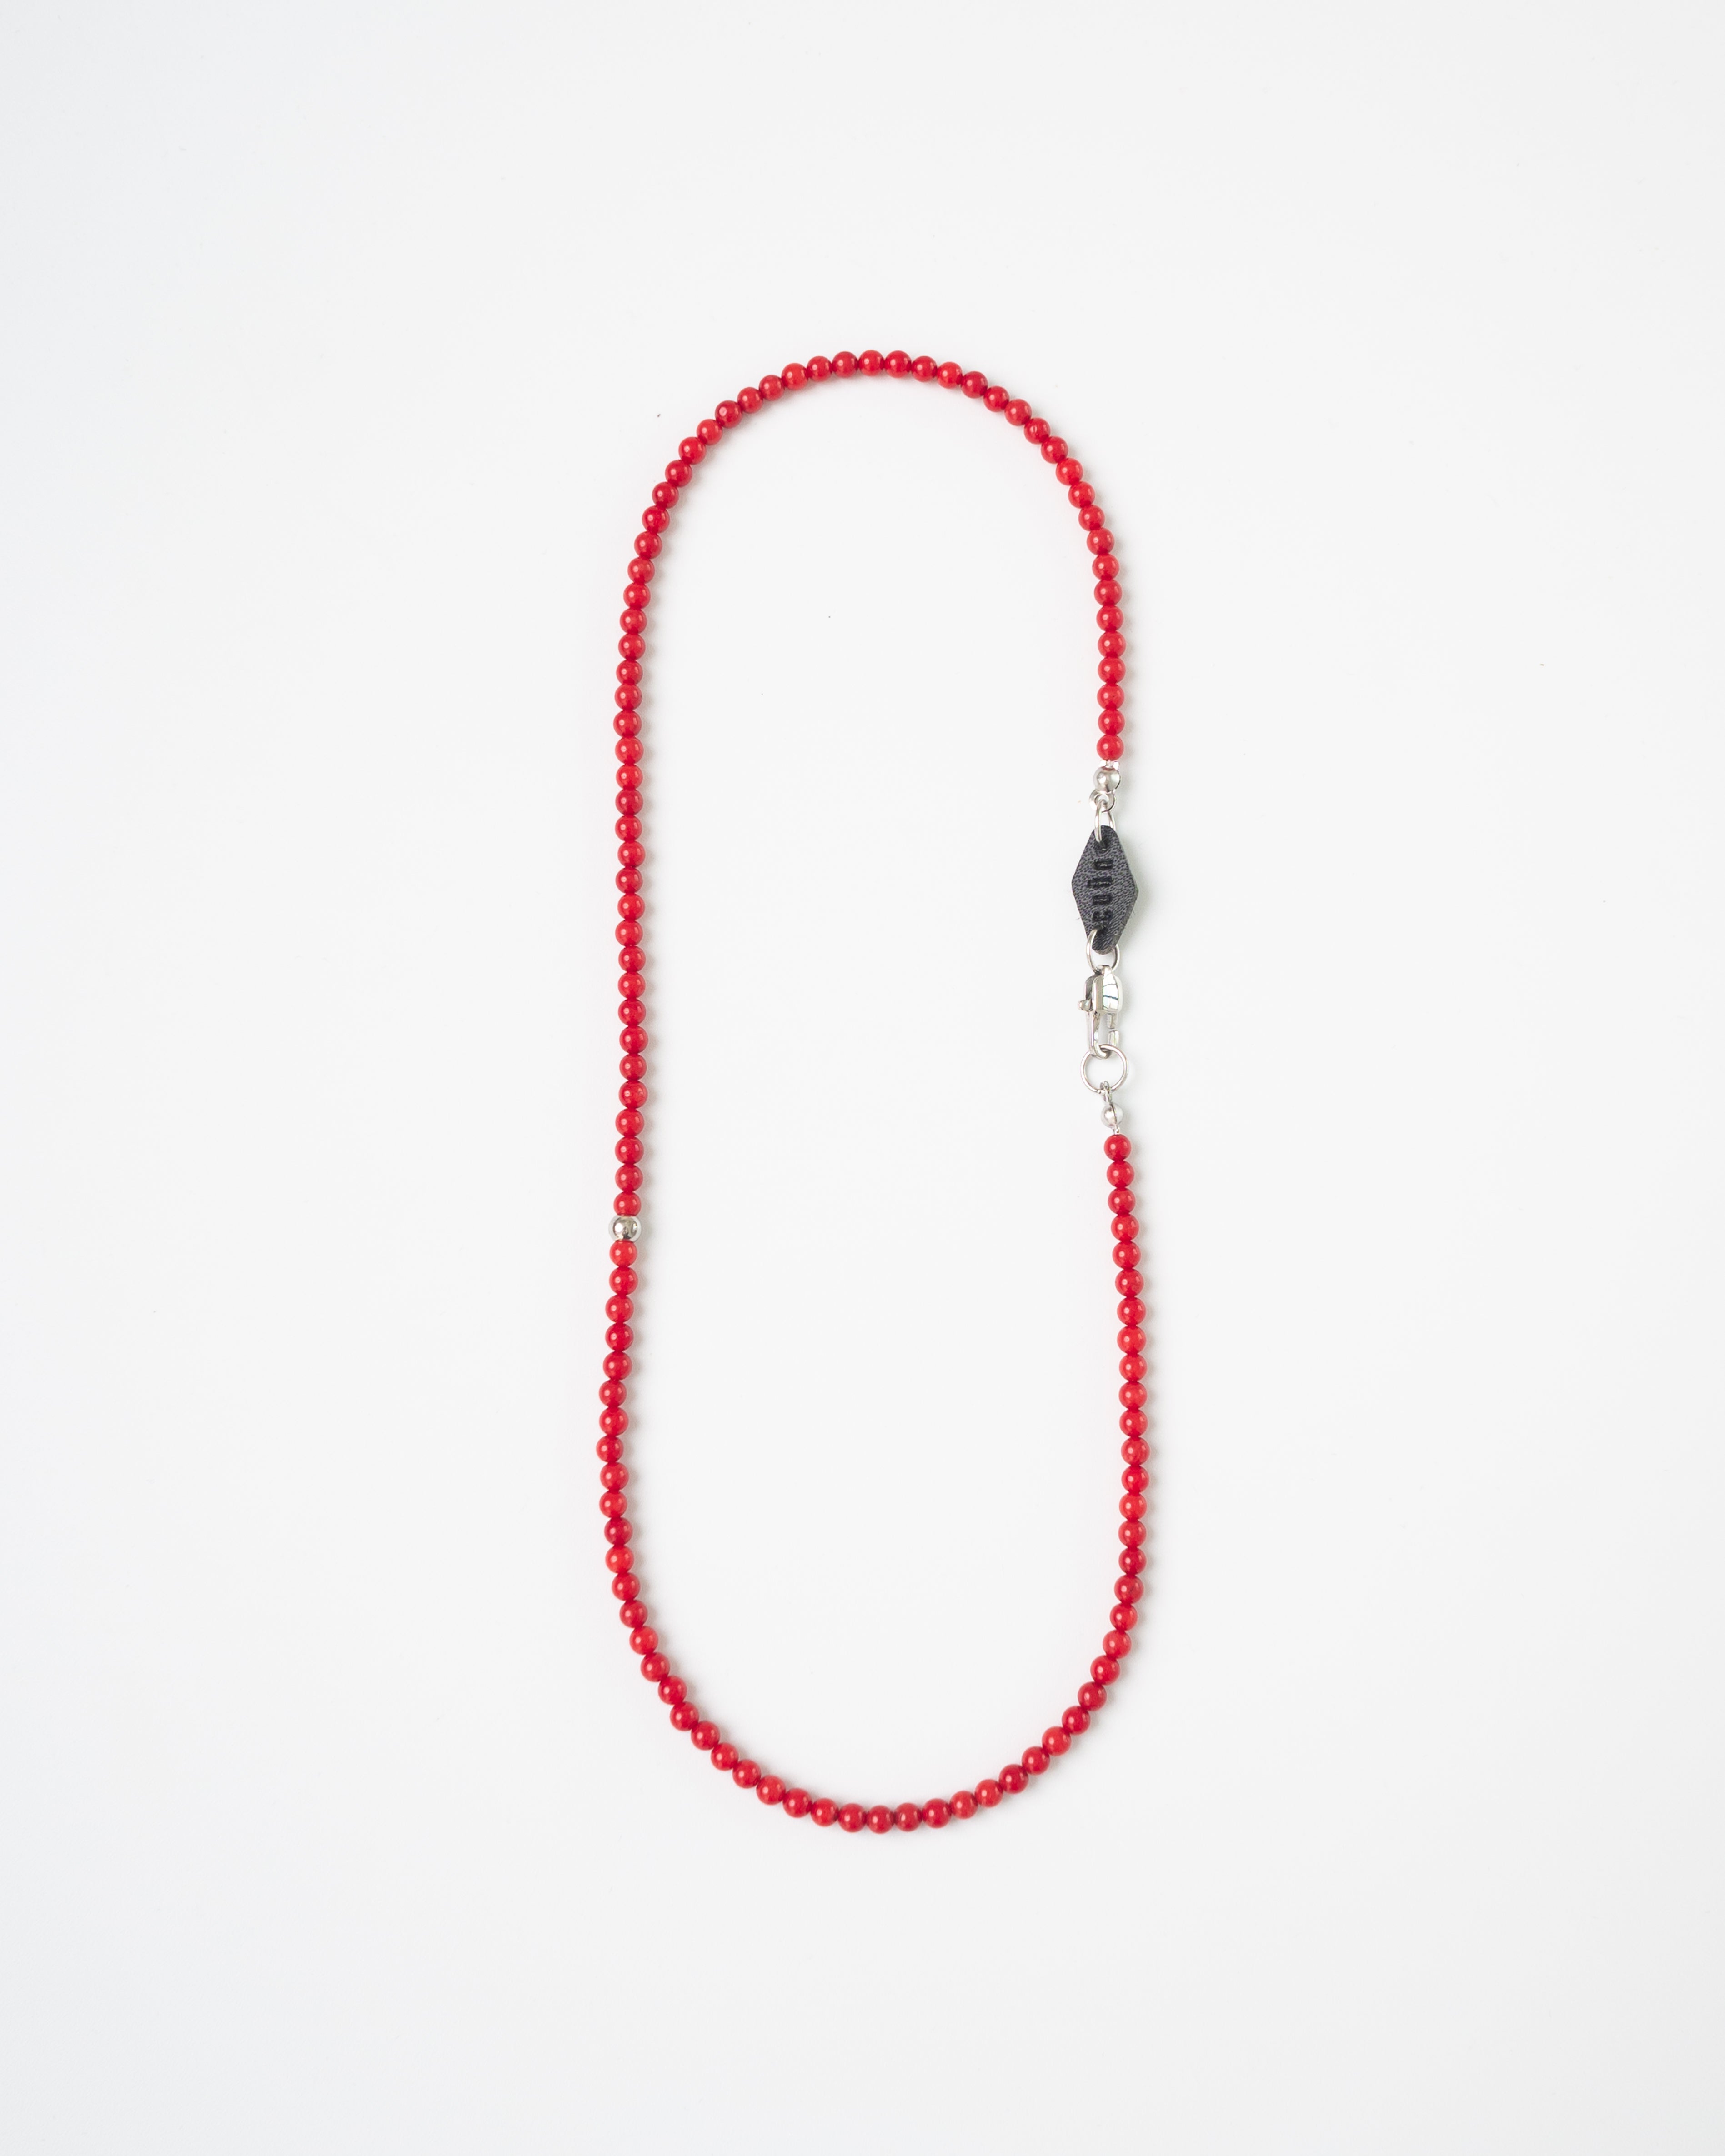 Flann Petite Coral Red Beaded Necklace